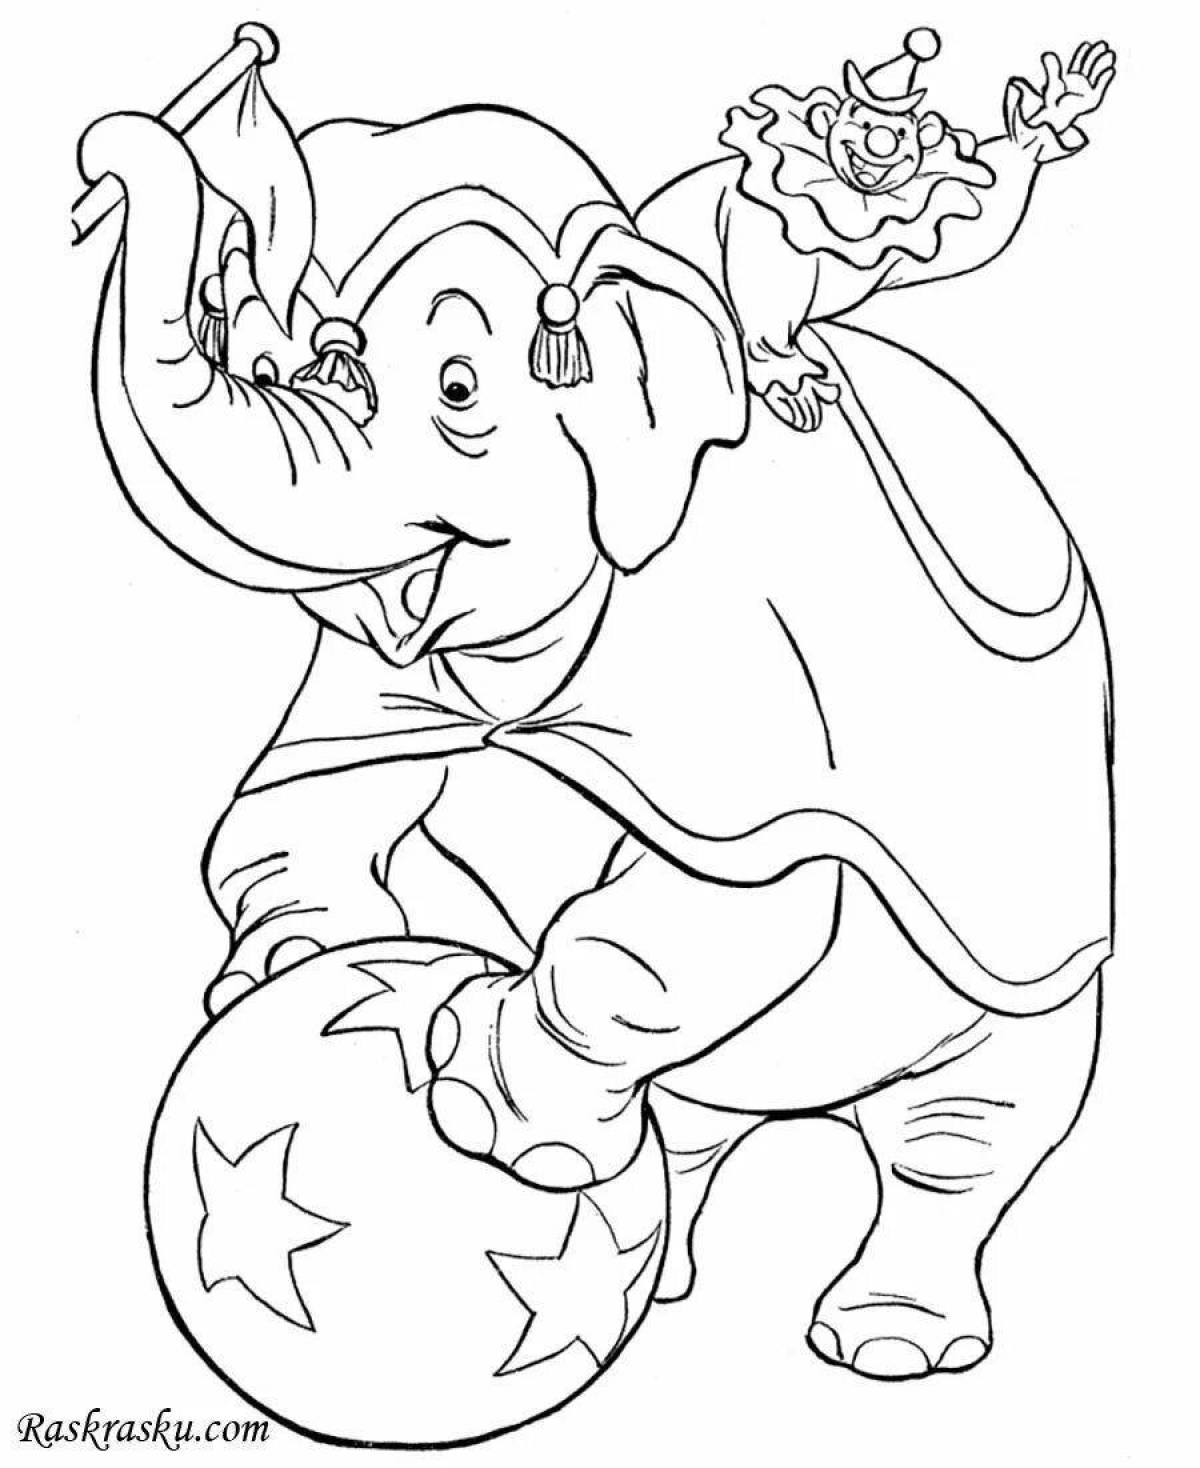 A wonderful circus elephant coloring book